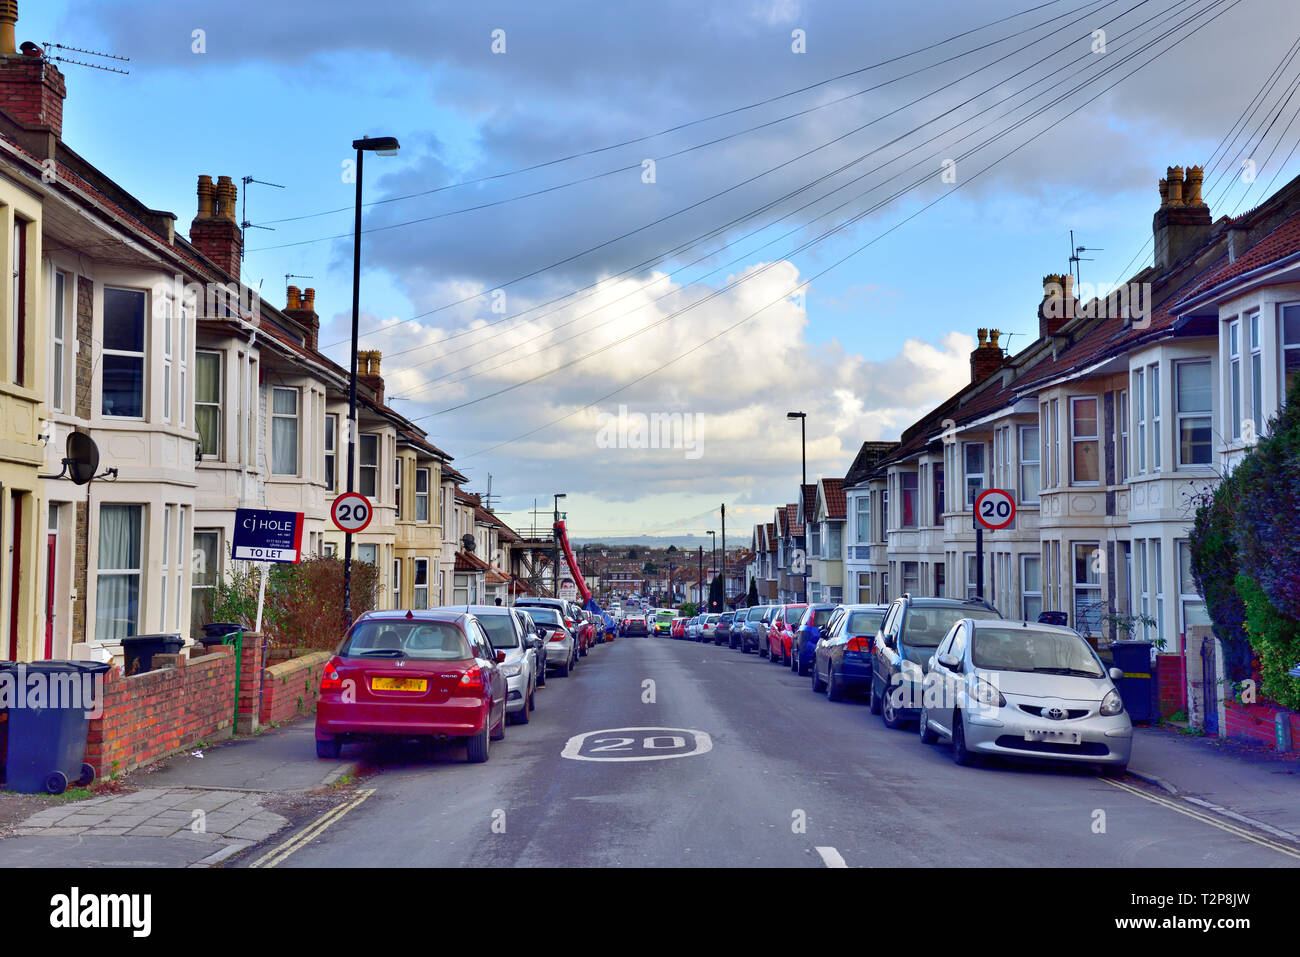 Looking down street of terraced bay windowed suburban houses in Filton with 20 mph speed signs, suburb of Bristol, England, UK Stock Photo